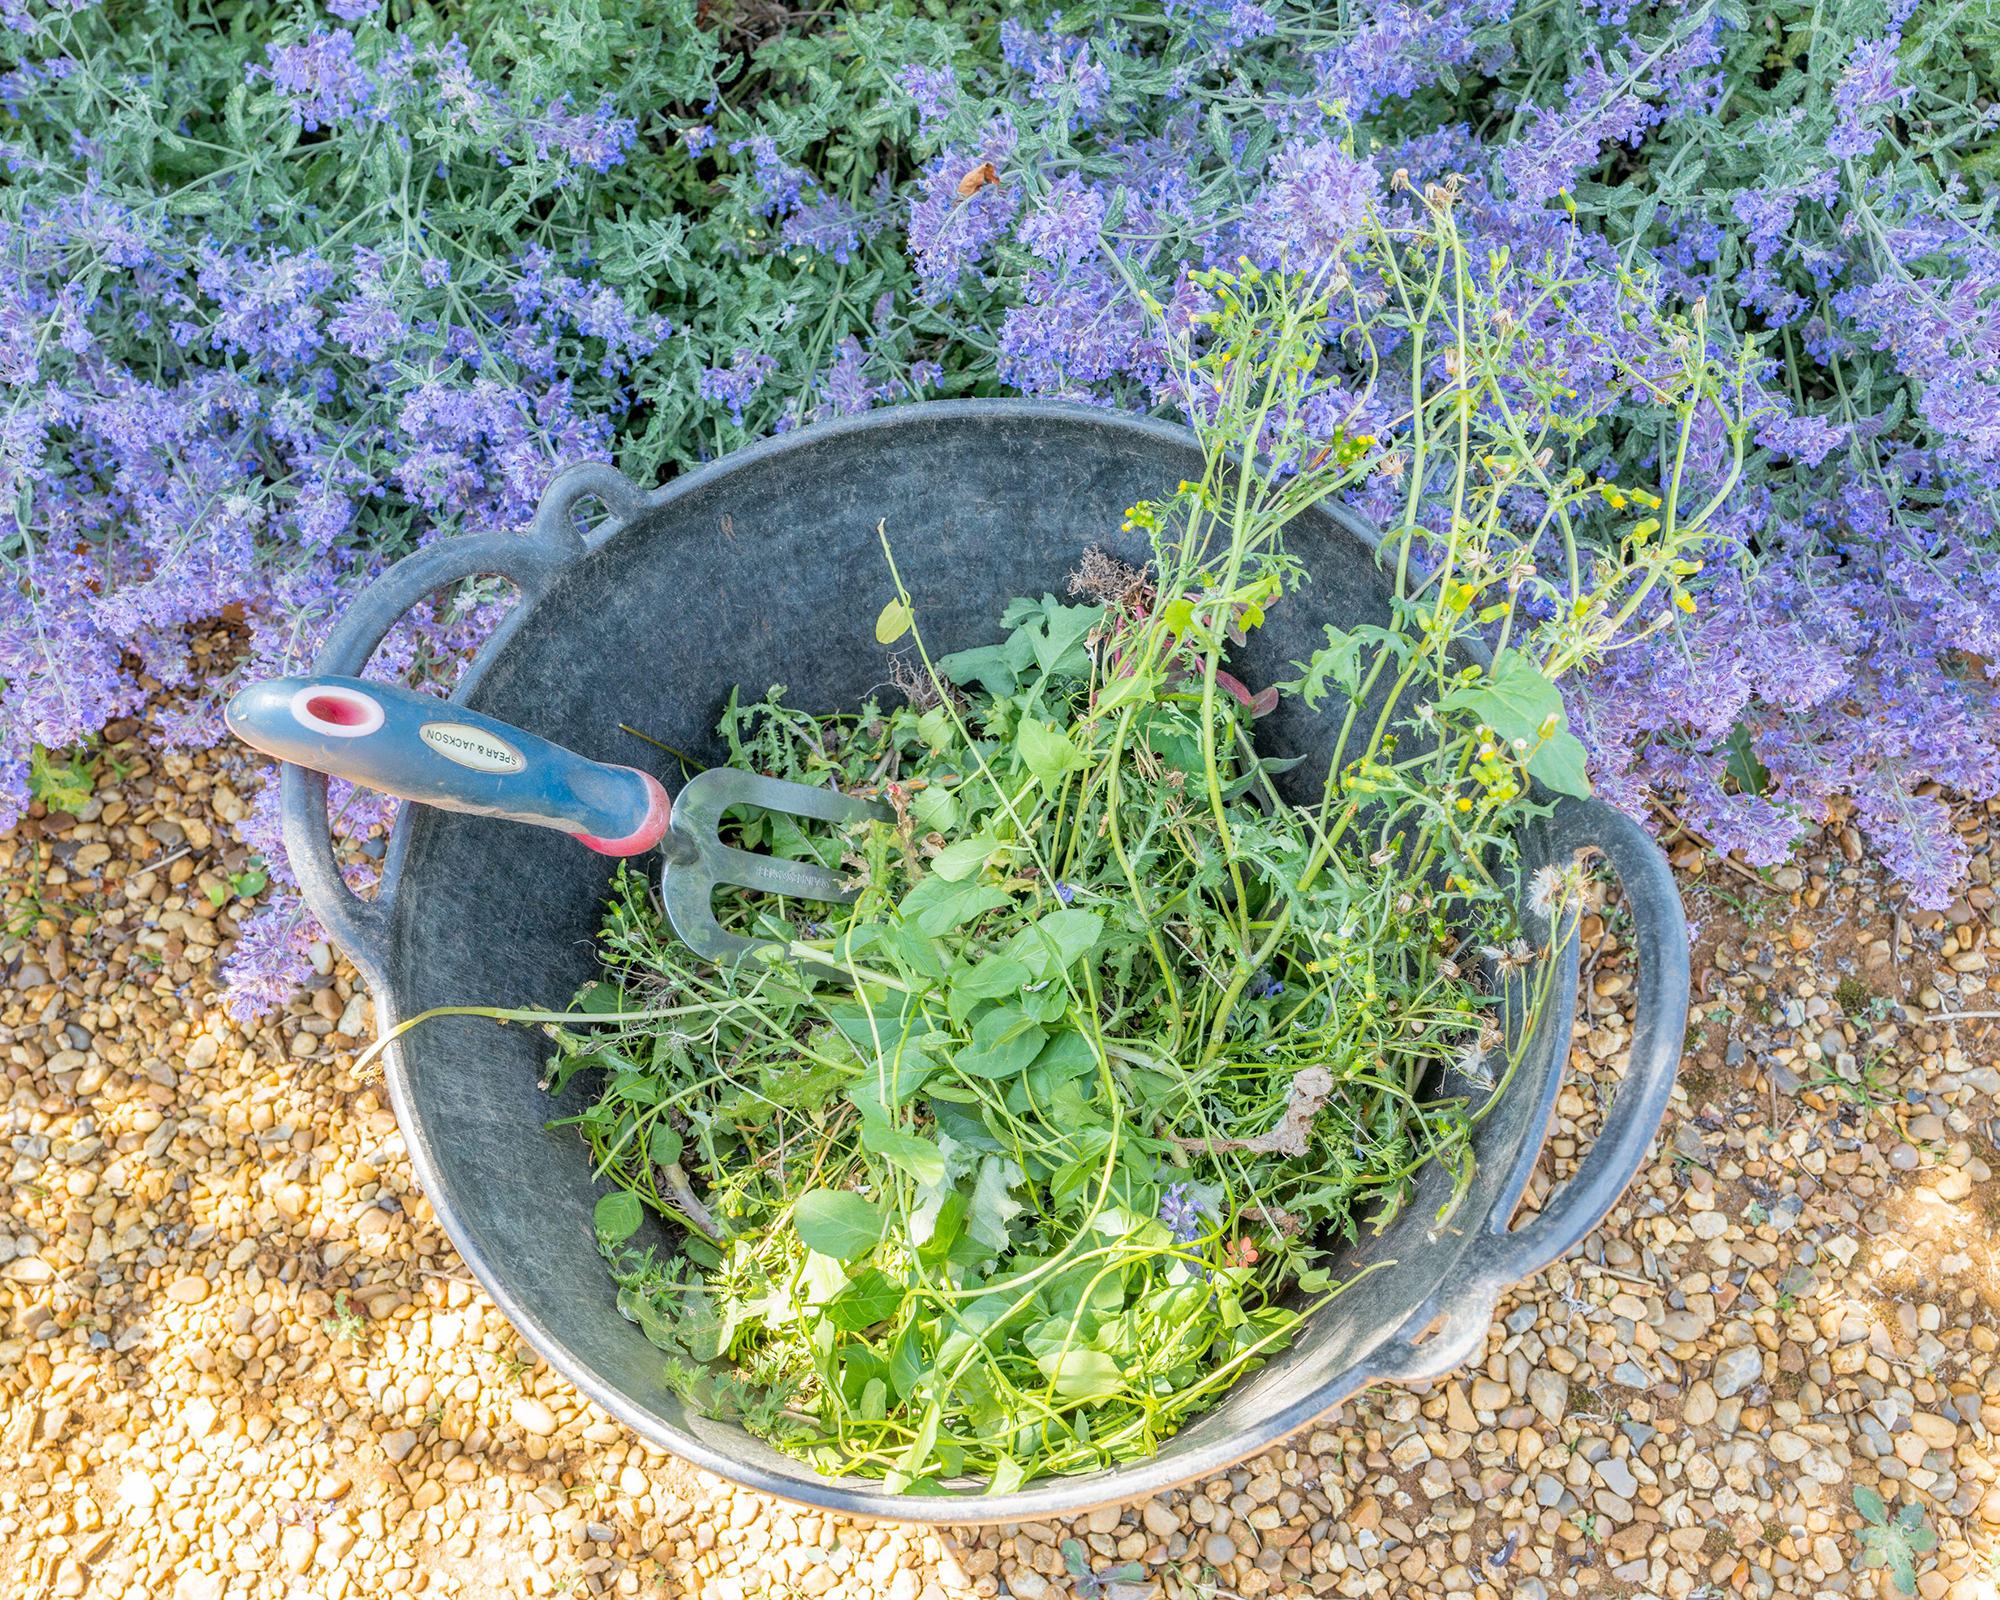 Weeds in bucket with hand fork